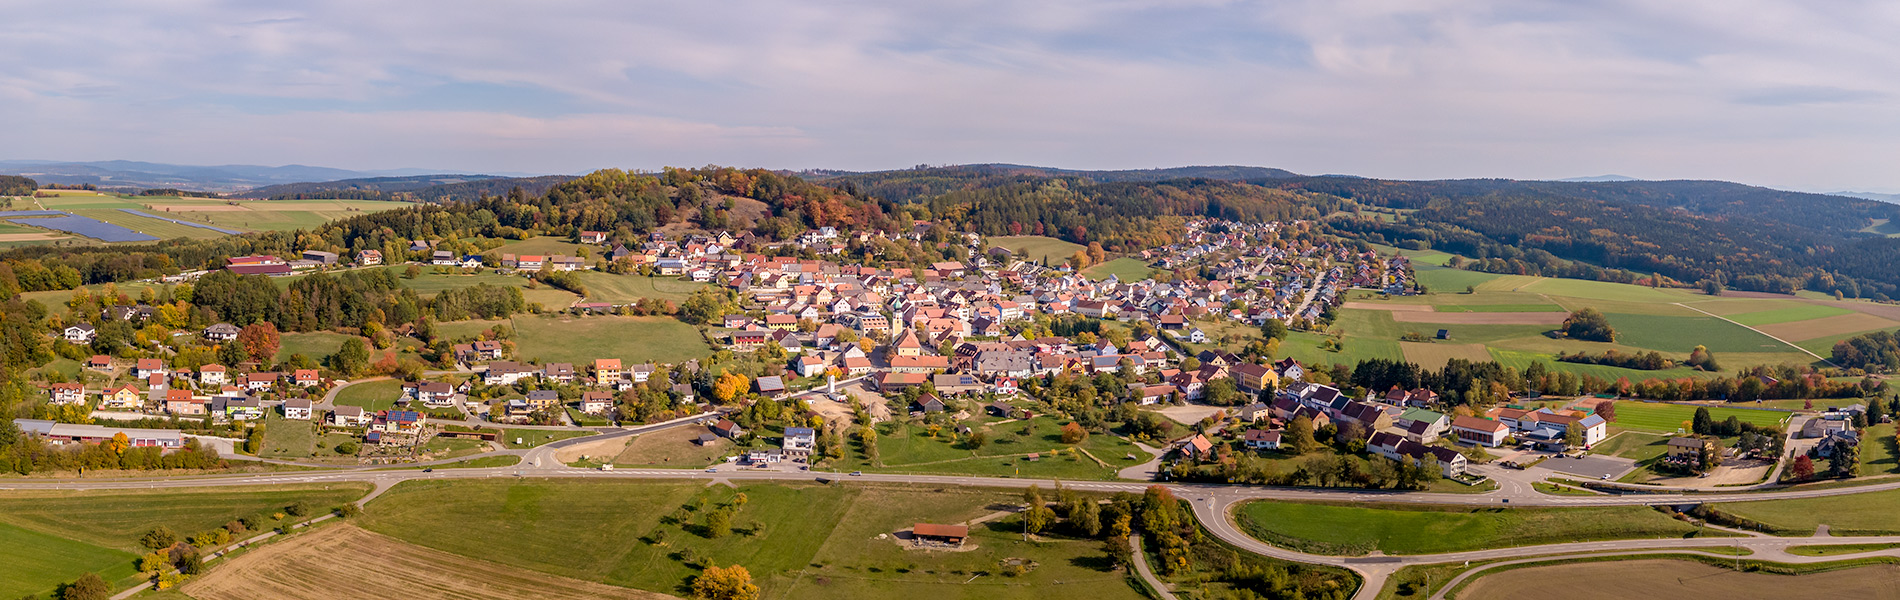 Tannenberg from up above